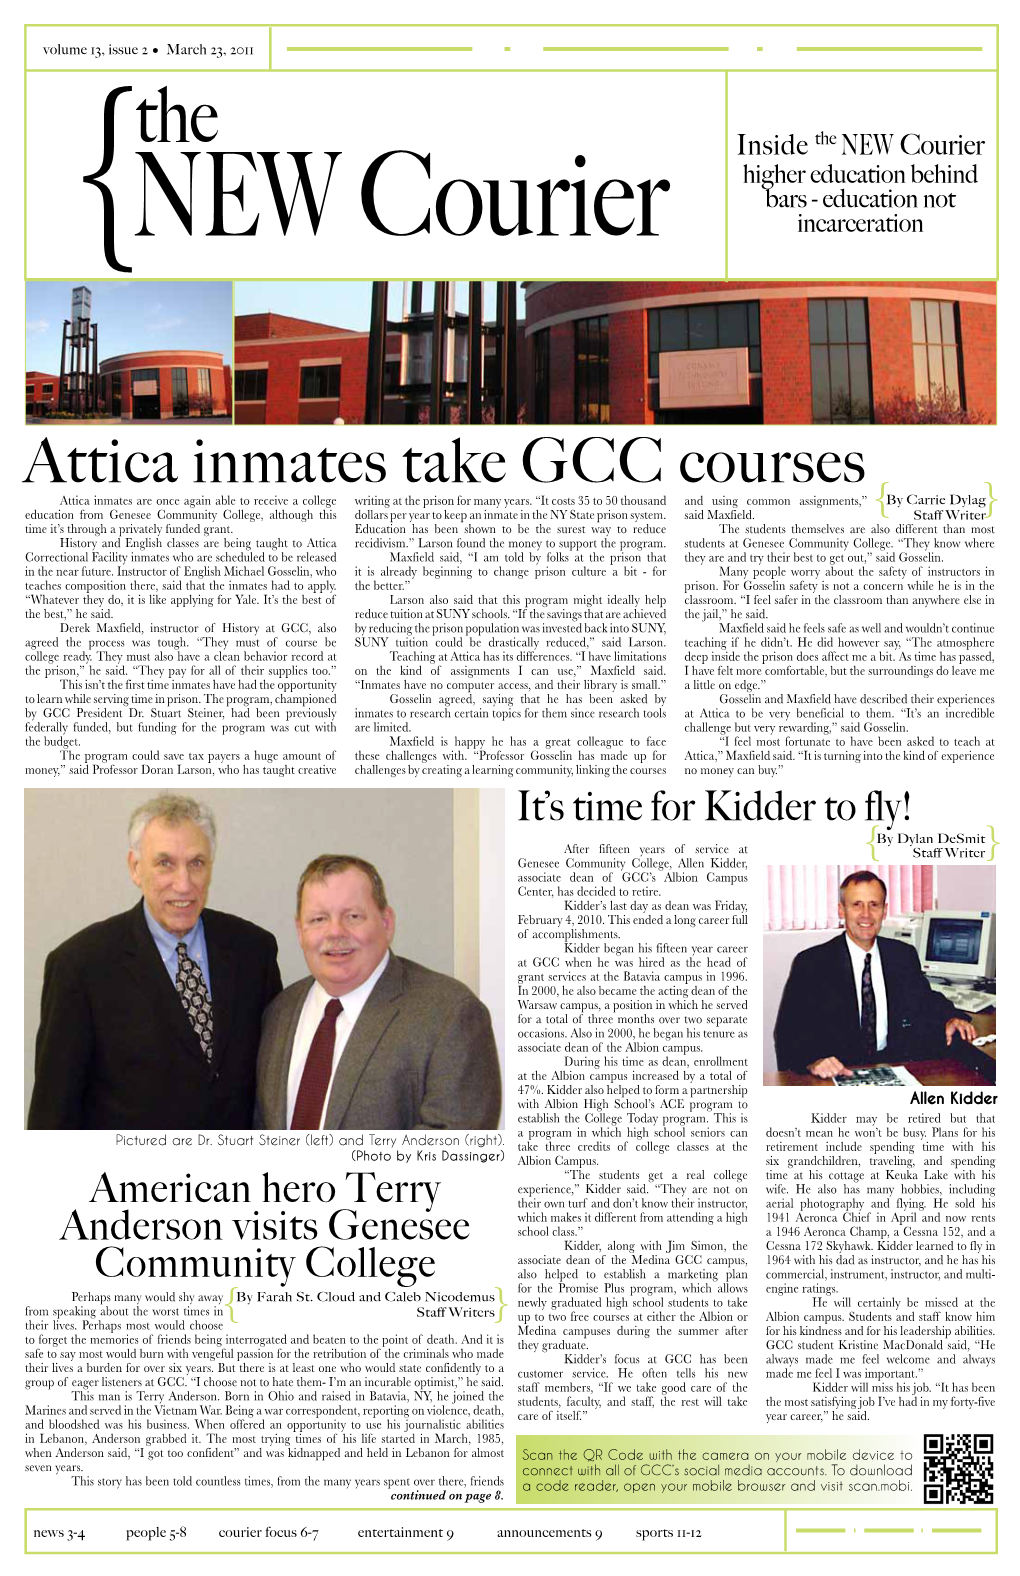 Attica Inmates Take GCC Courses Attica Inmates Are Once Again Able to Receive a College Writing at the Prison for Many Years